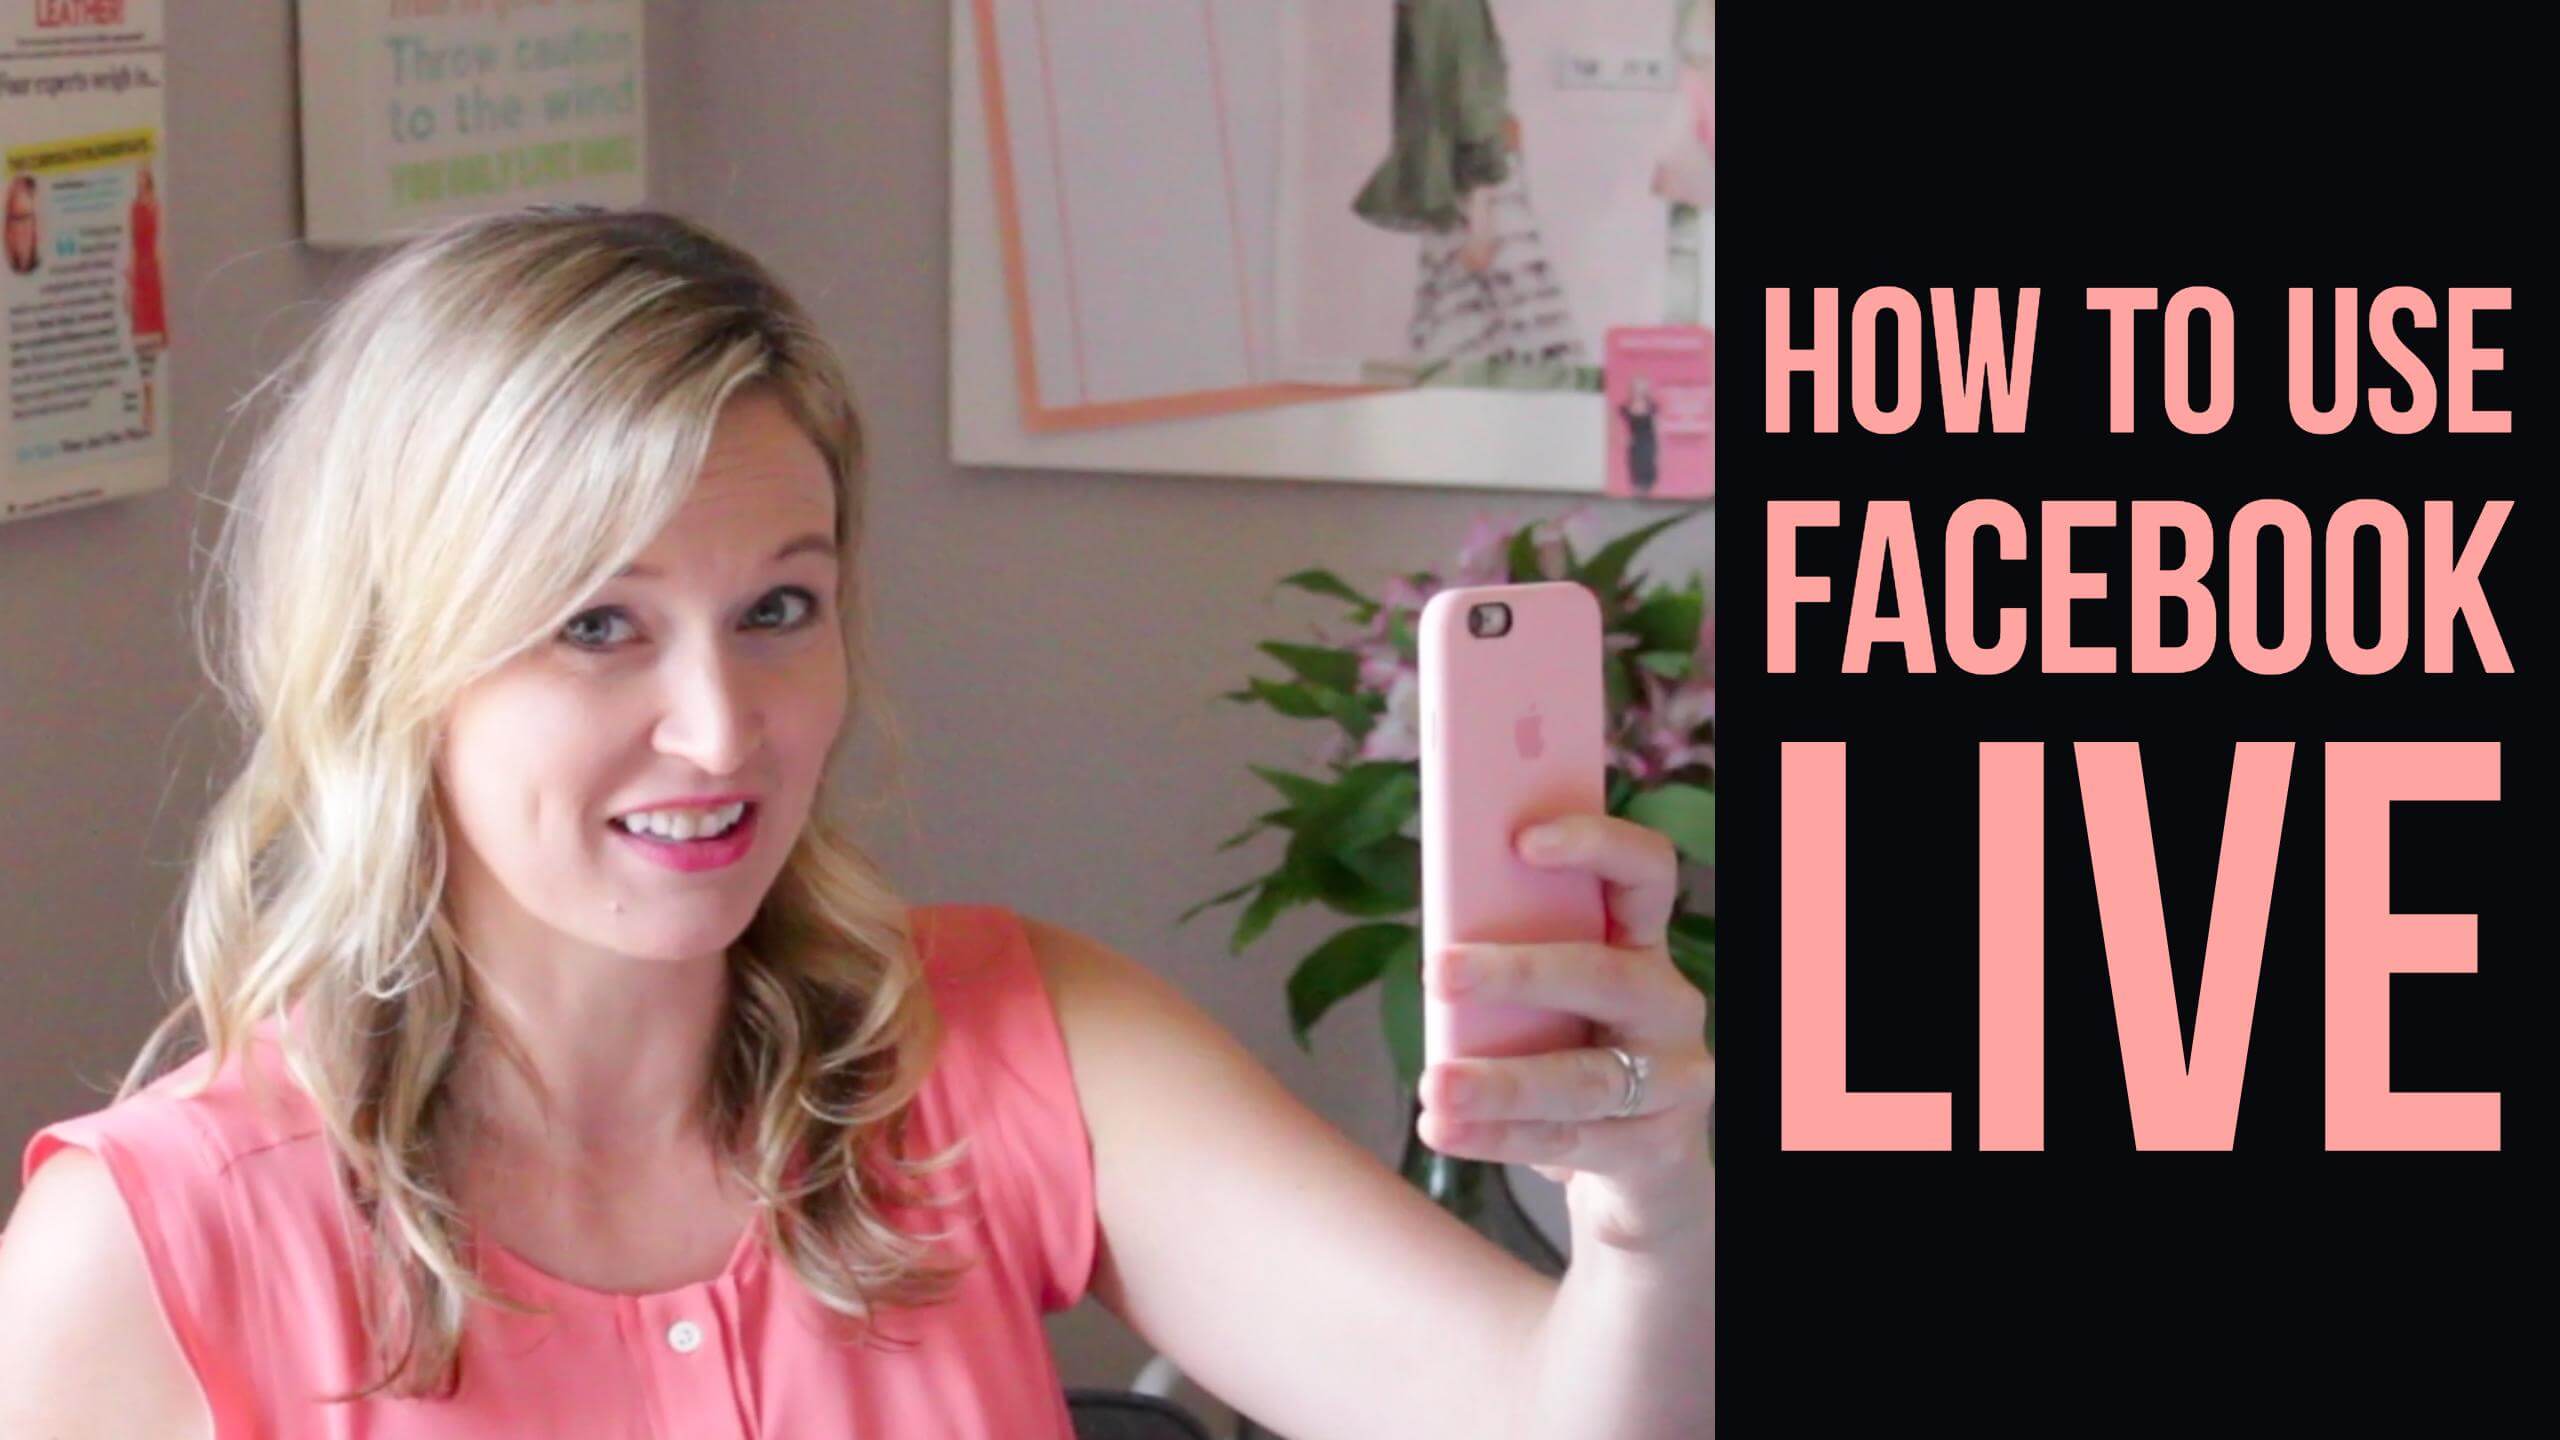 How to use facebook live